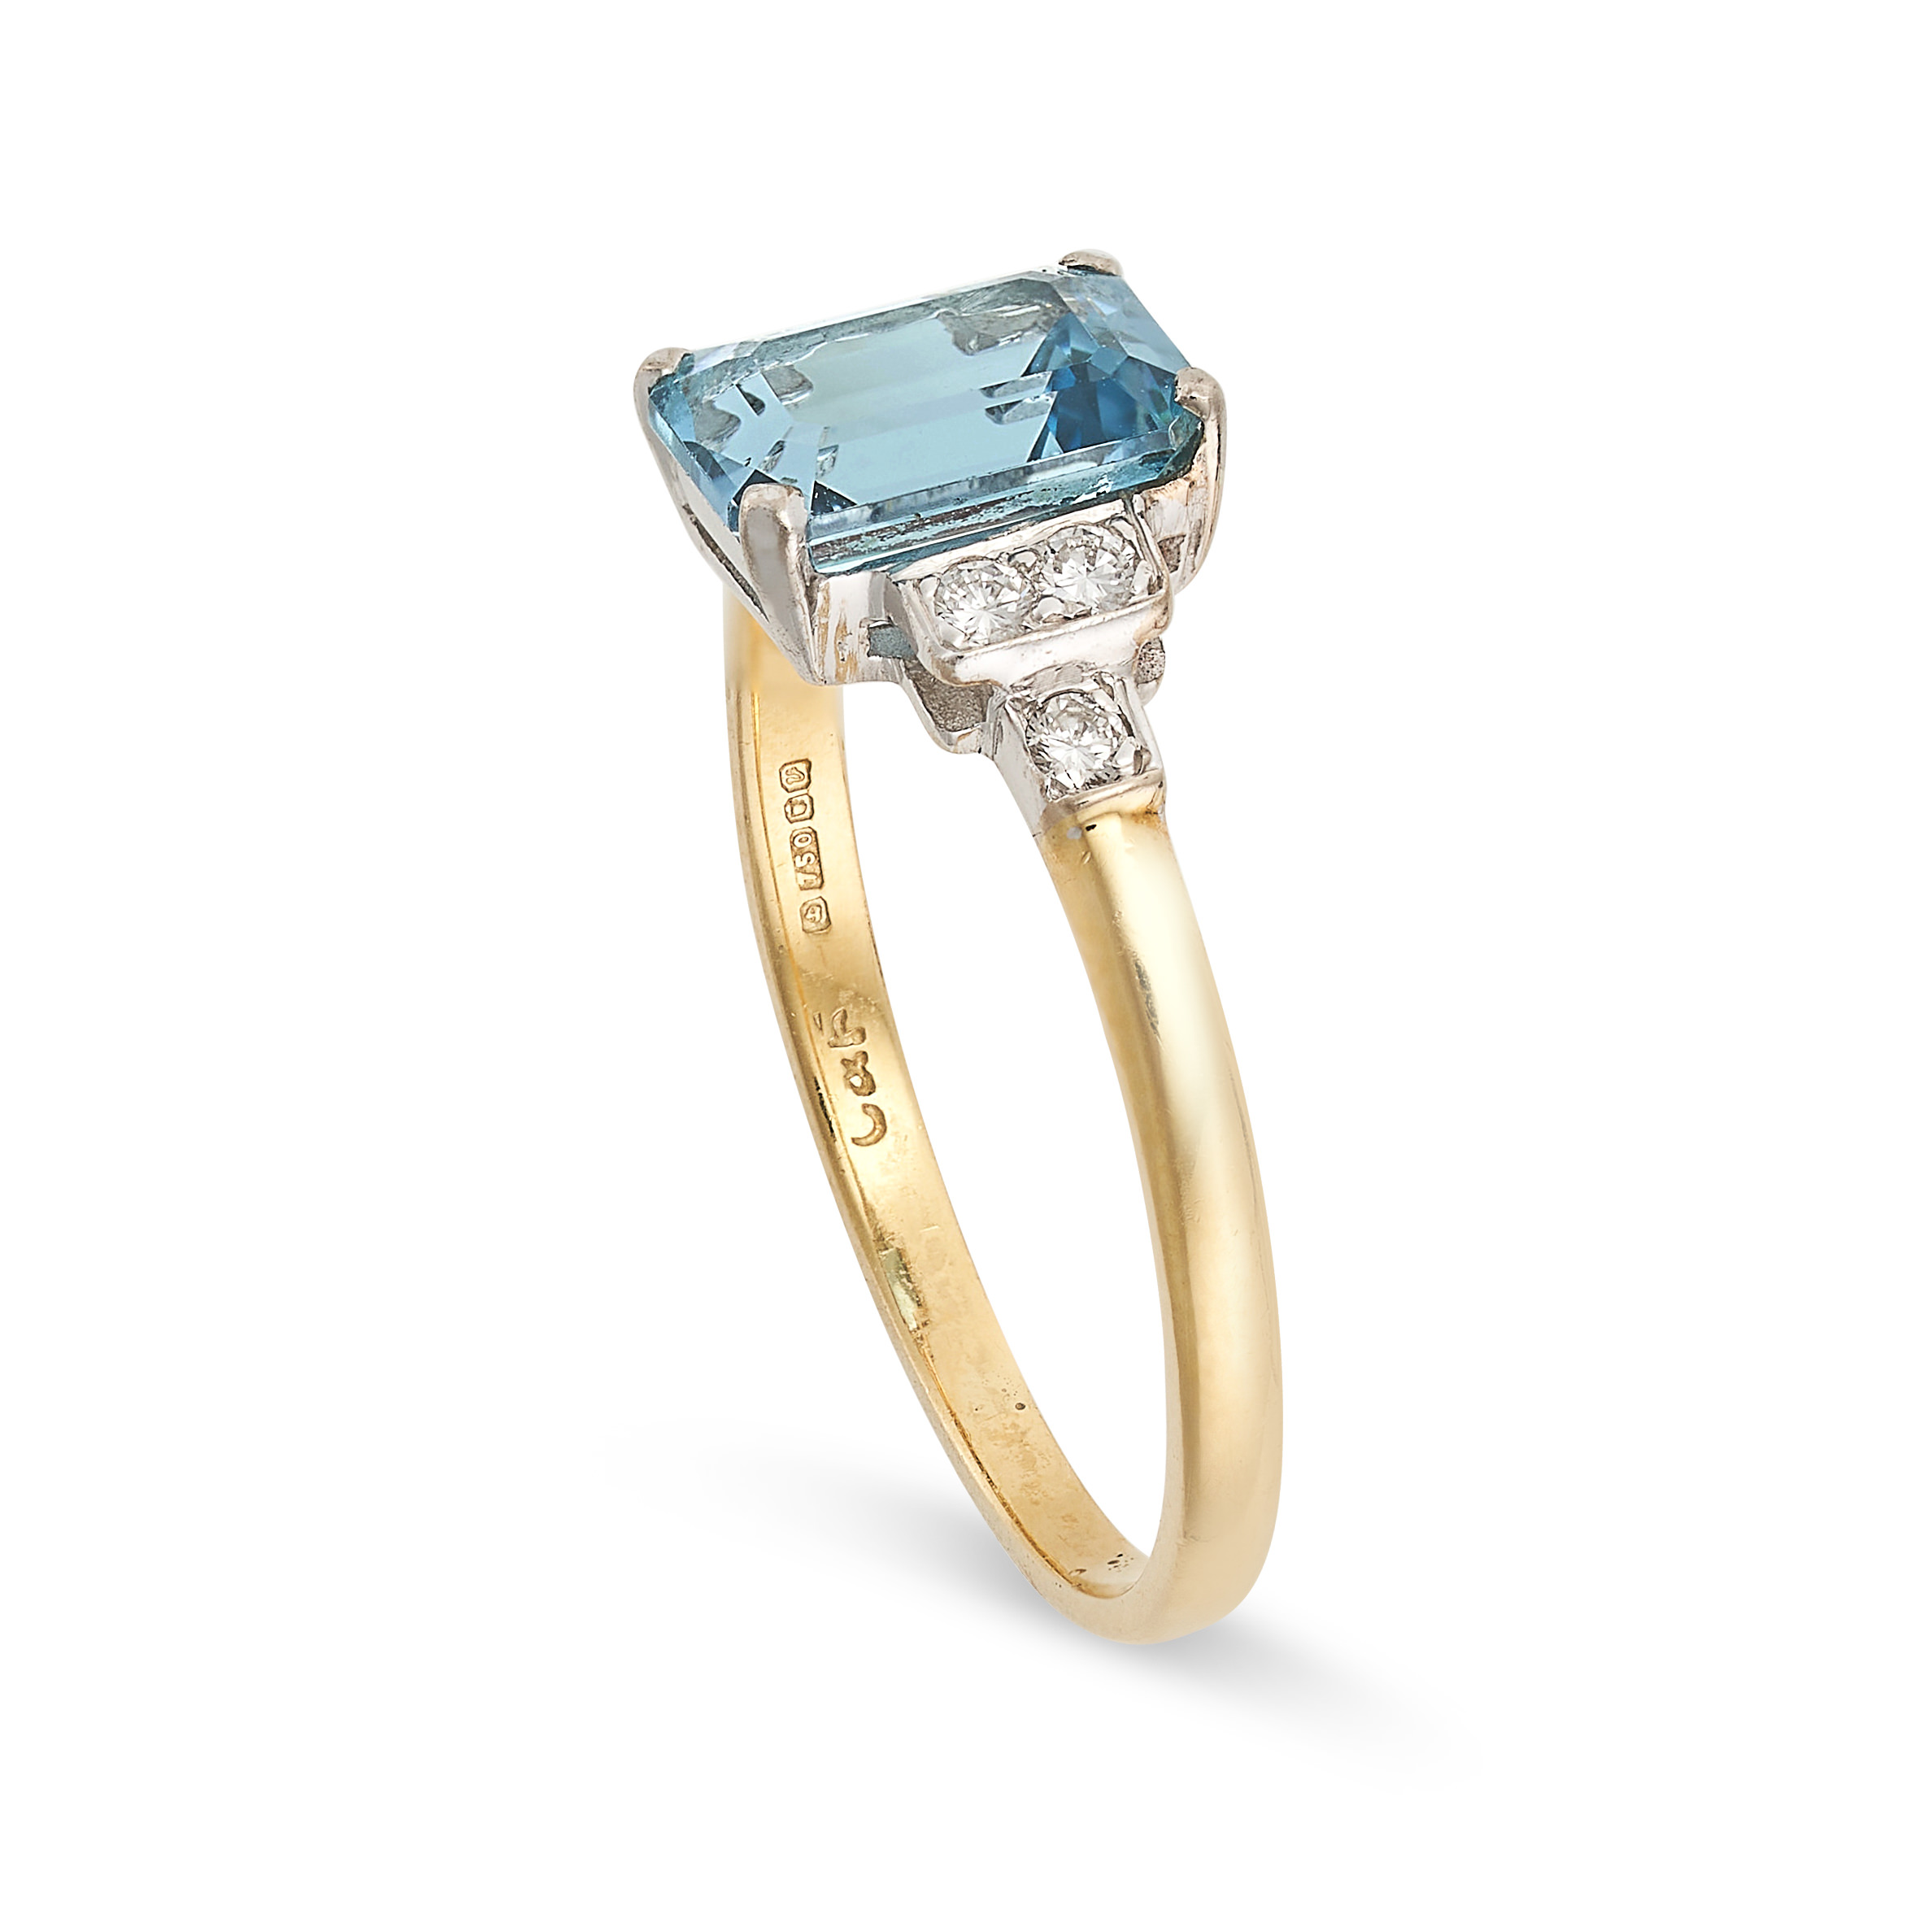 A BLUE TOPAZ AND DIAMOND RING in 18ct yellow gold, set with an emerald cut blue topaz, the stepped - Image 2 of 2